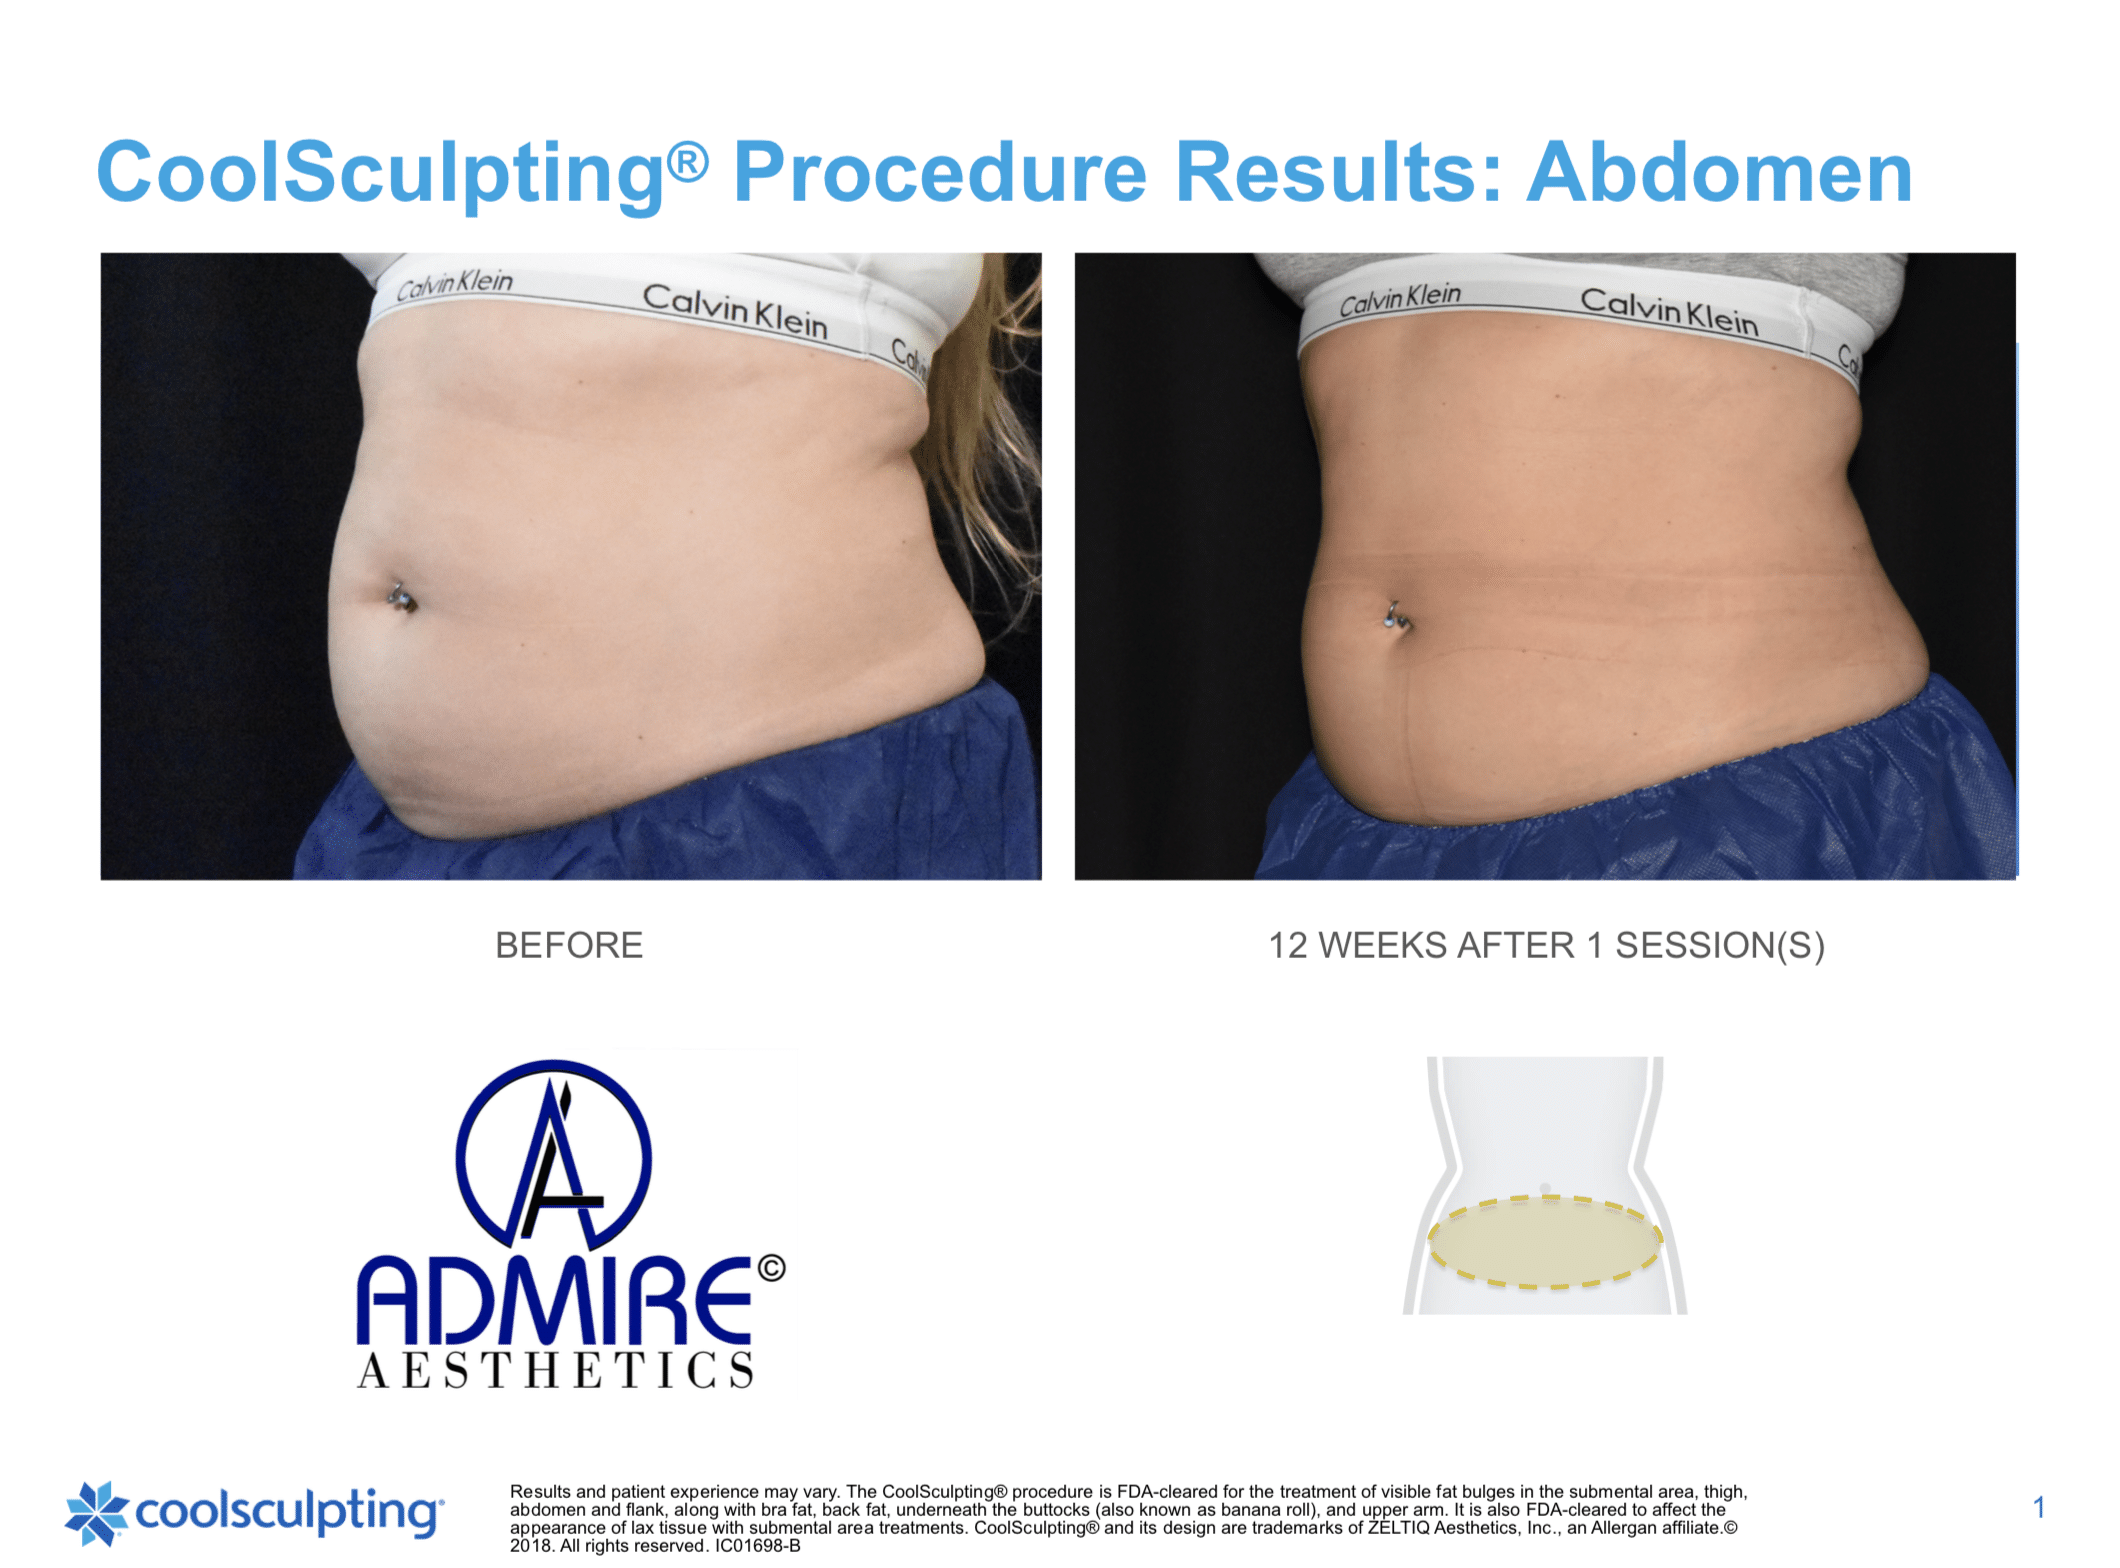 Womans abdomen before and after coolsculpting elite treatment at Admire Aesthetics.